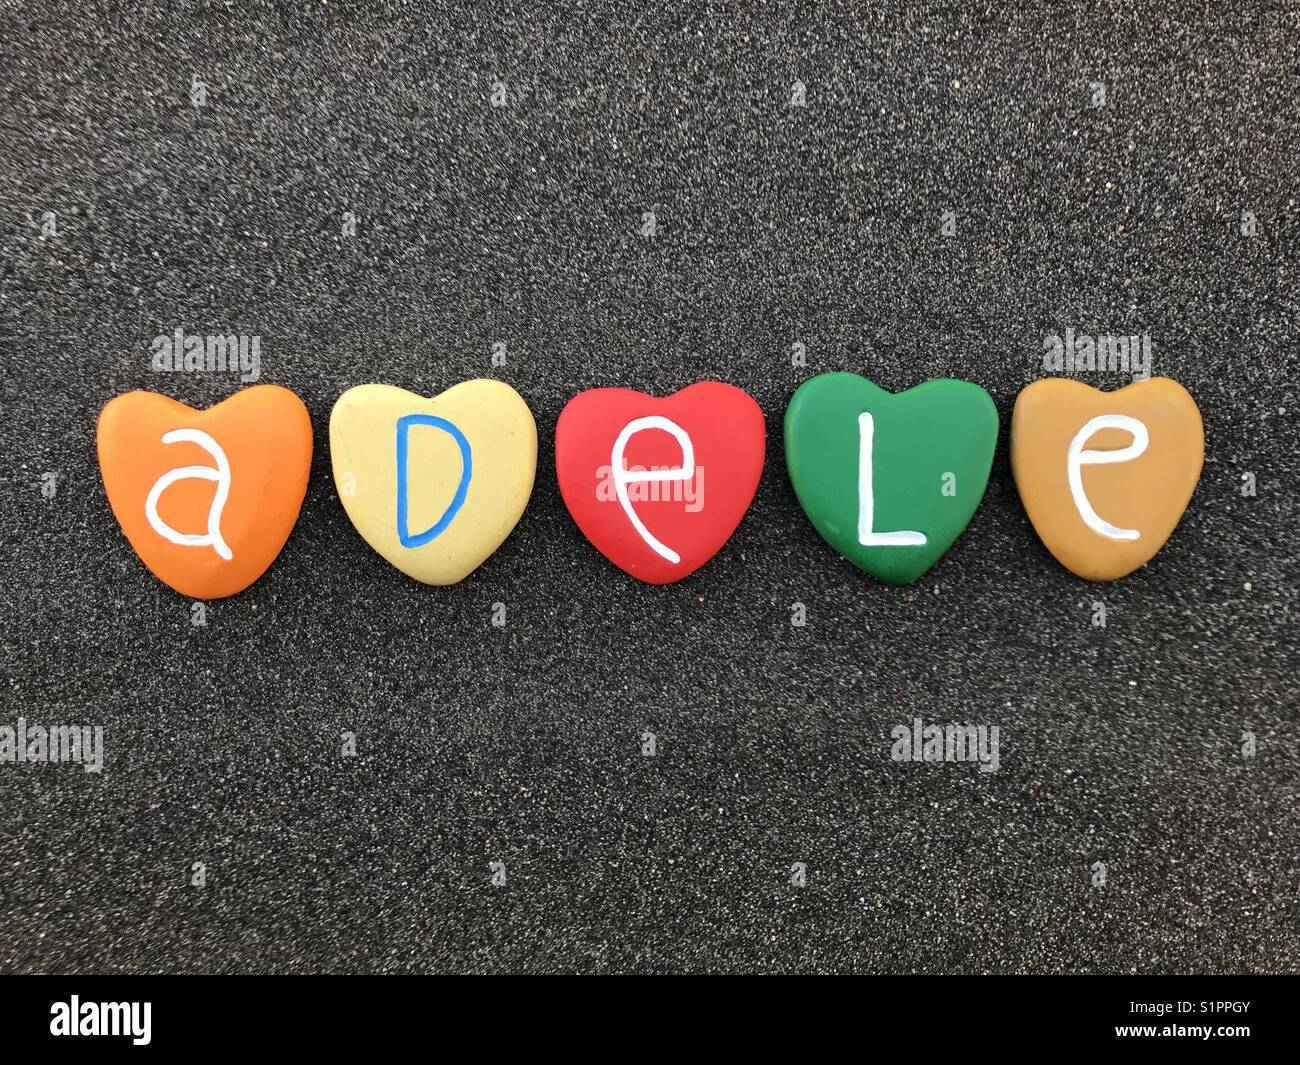 Adele, feminine name with colored heart stones over black volcanic sand Stock Photo